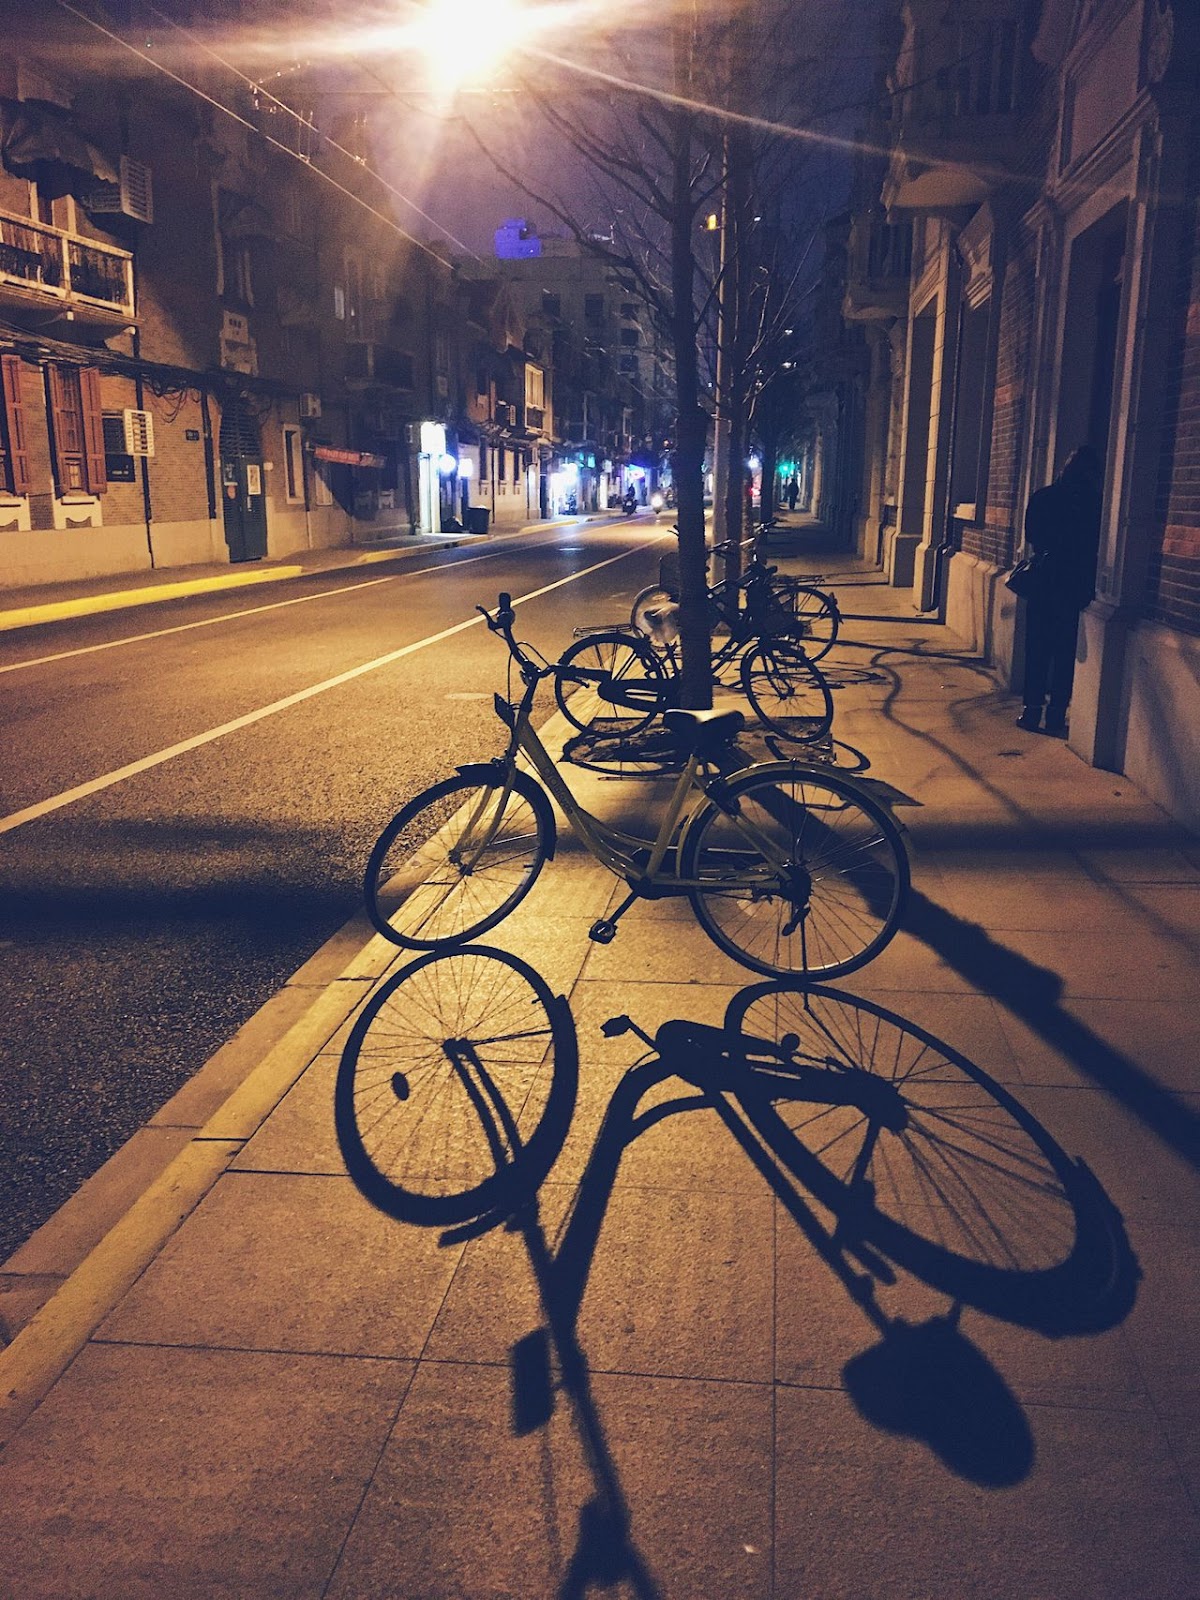 Bicycled parked on sidewalk at night